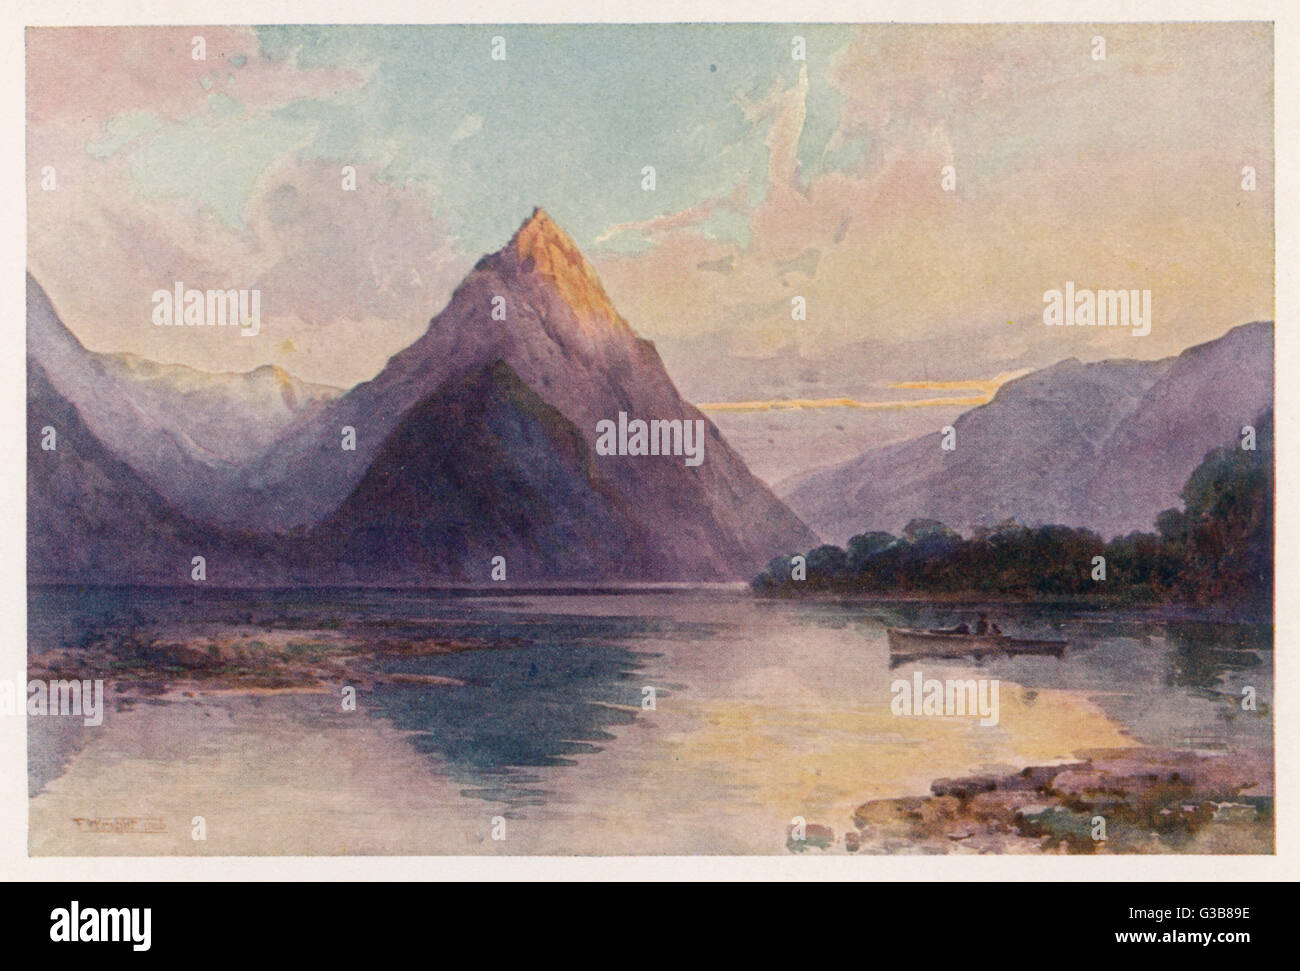 Mitre Peak:  a dramatically pointed  mountain reflected in the water below      Date: 1908 Stock Photo